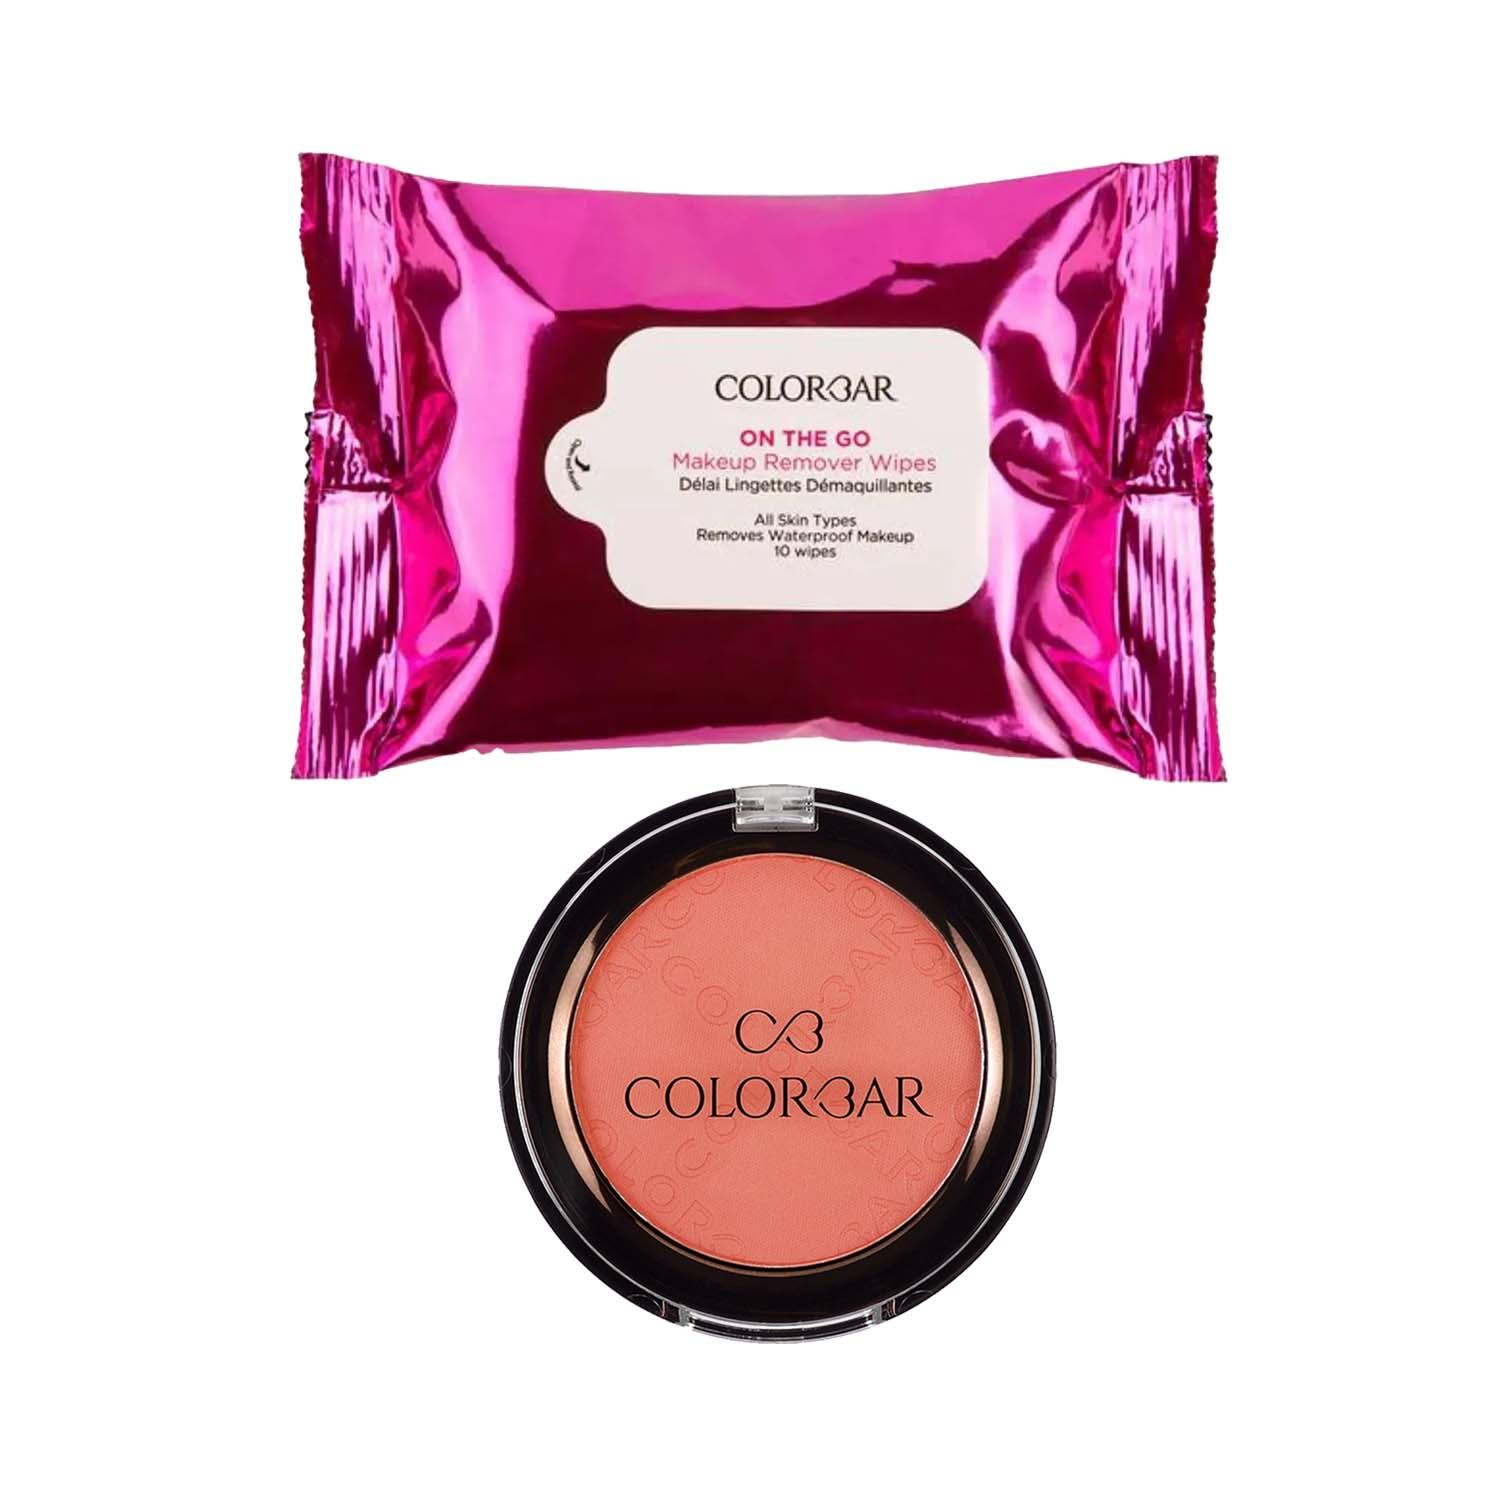 Colorbar | Colorbar Cheek illusion Blush + On The Go Makeup Remover Wipes Combo